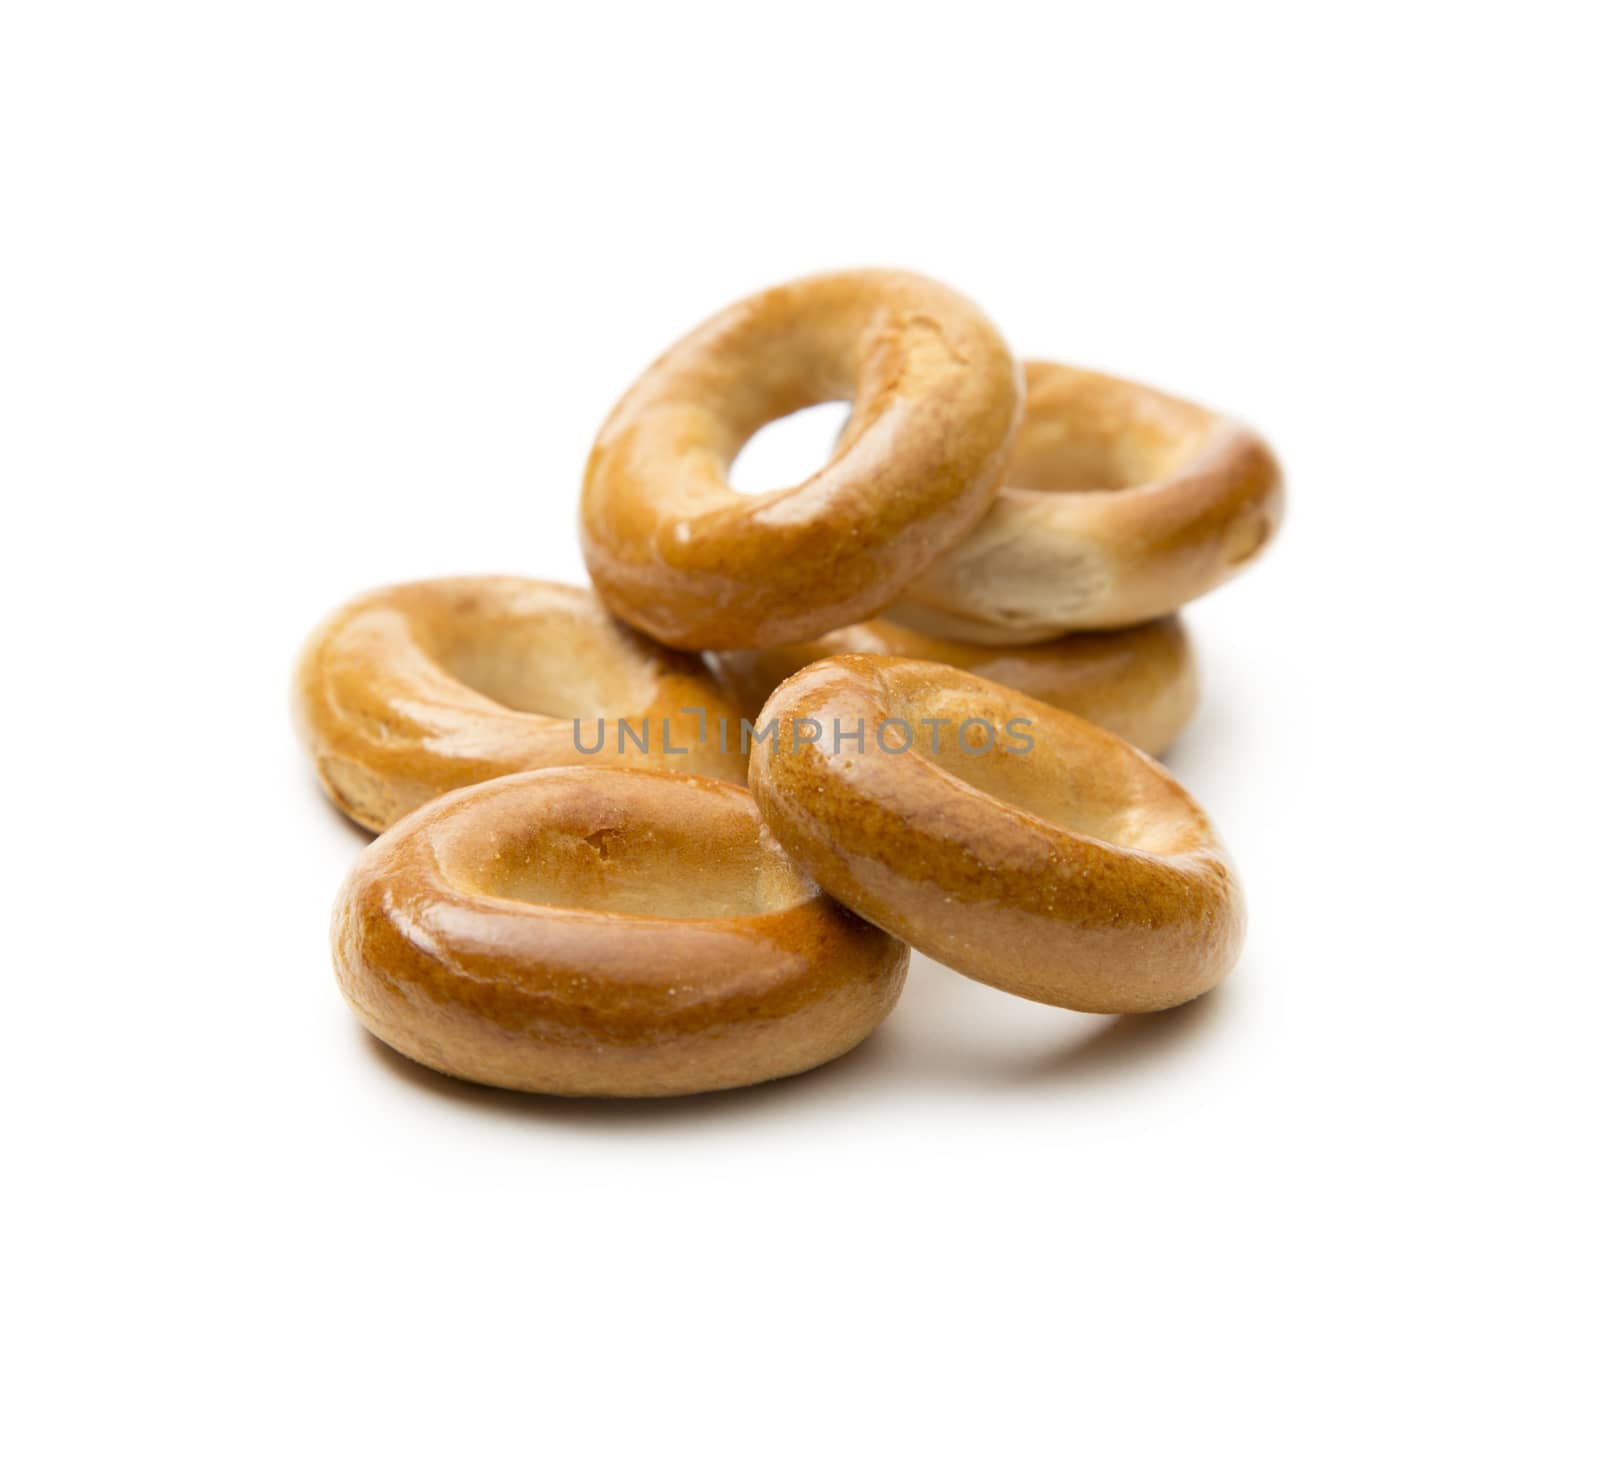 Small bread ring crackers on white by Garsya